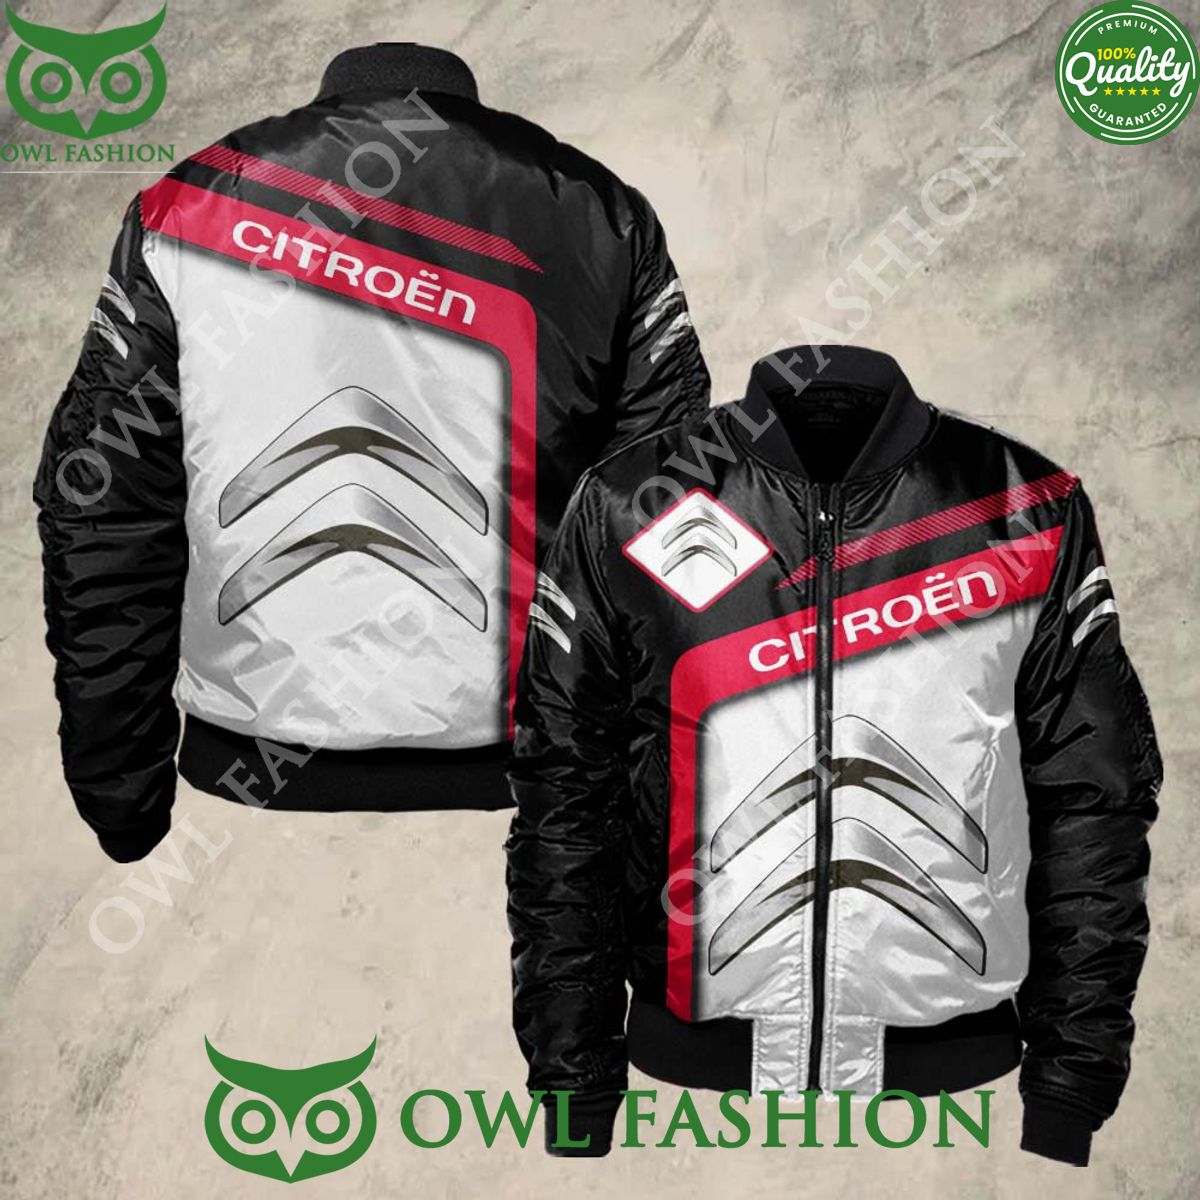 Citroen Sport 3D Bomber Jacket My favourite picture of yours